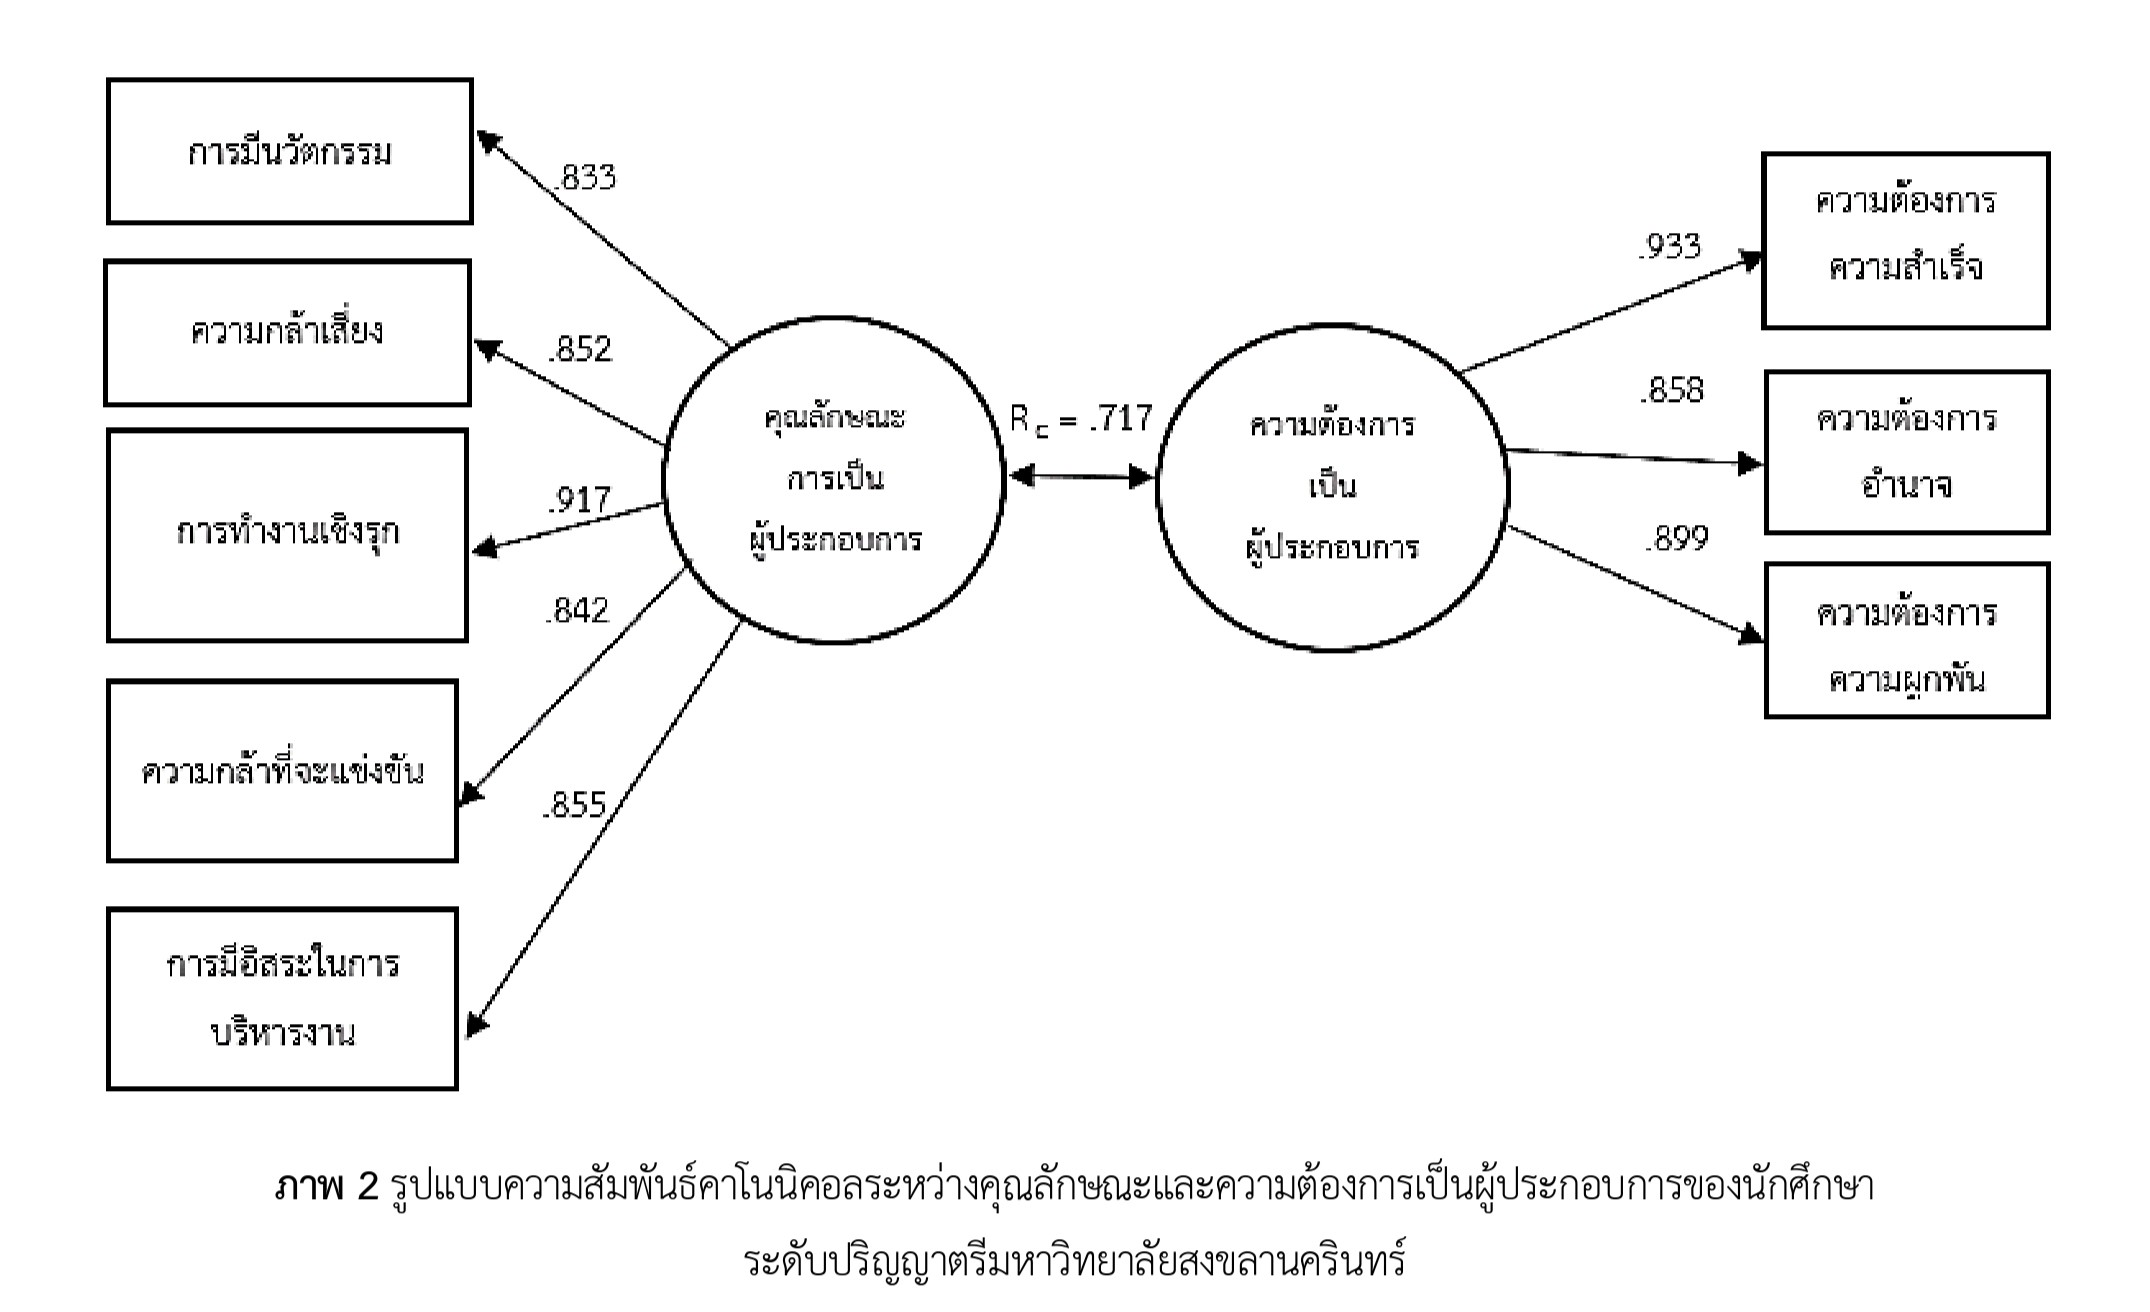 Figure 2: Canonical Correlation Model between Attributes and Entrepreneurial Intentions of Undergraduate Students at Prince of Songkla University